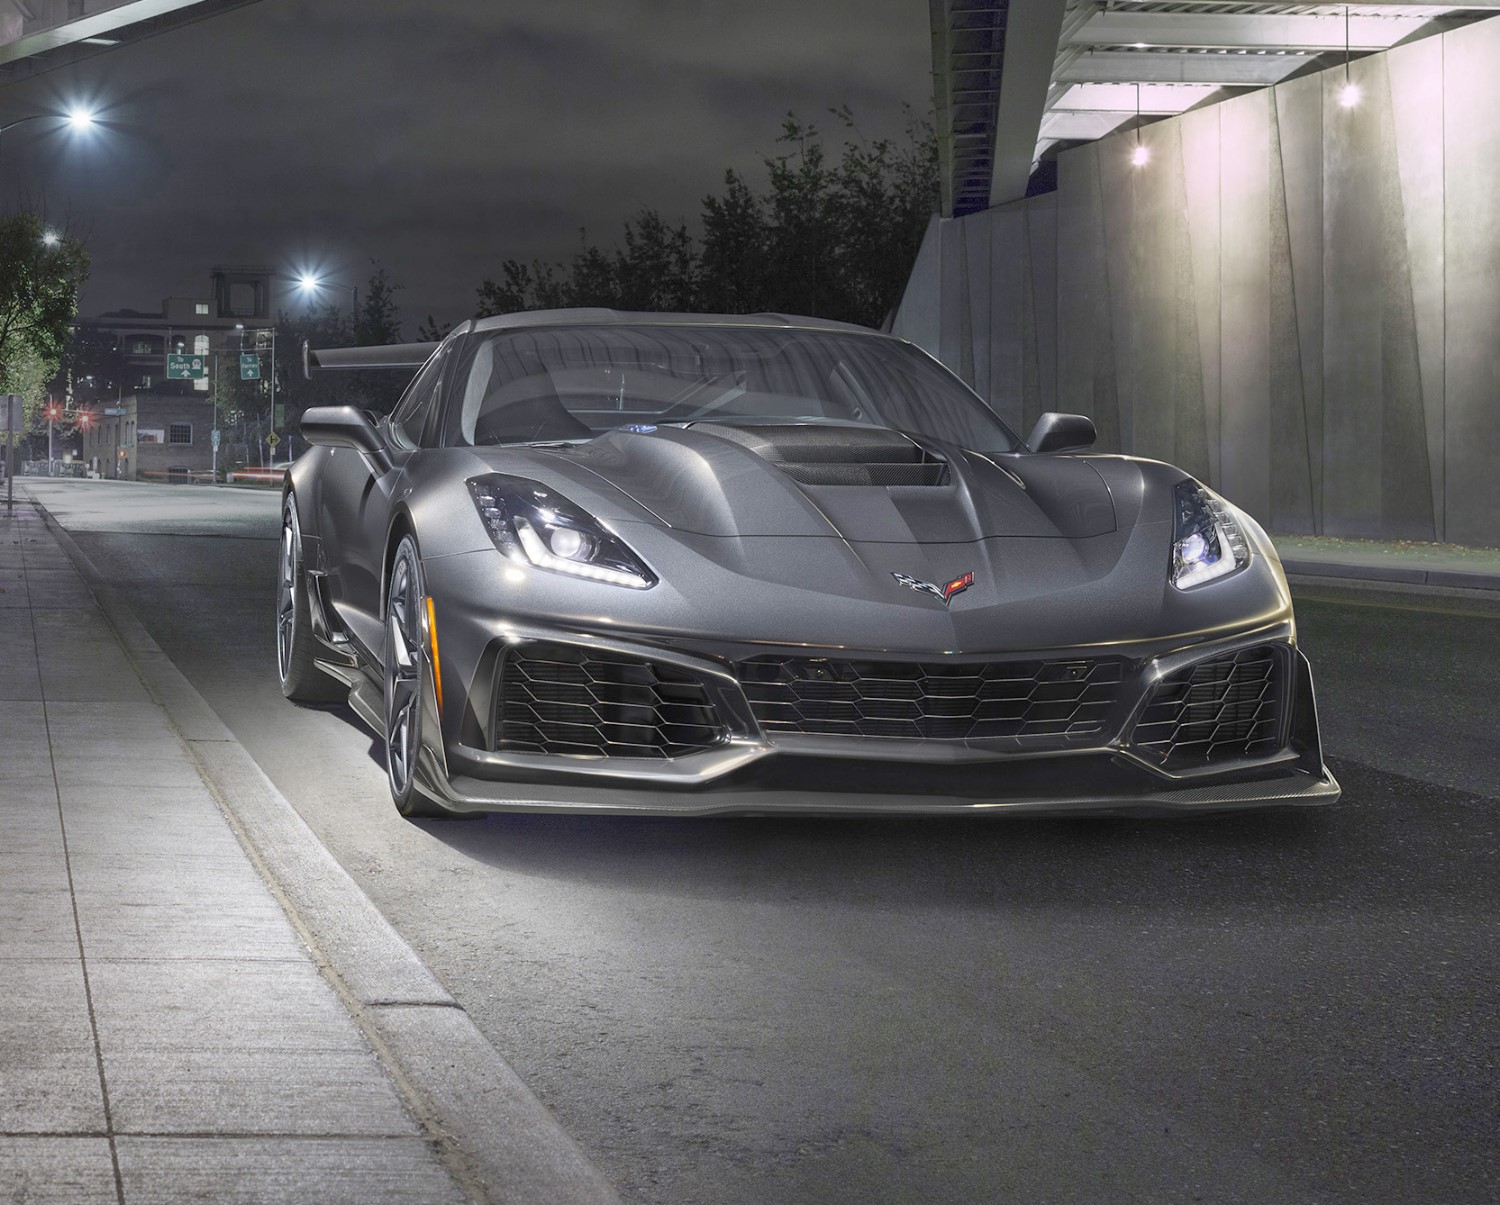 The fastest, most powerful production Corvette ever – the 755-horsepower 2019 ZR1